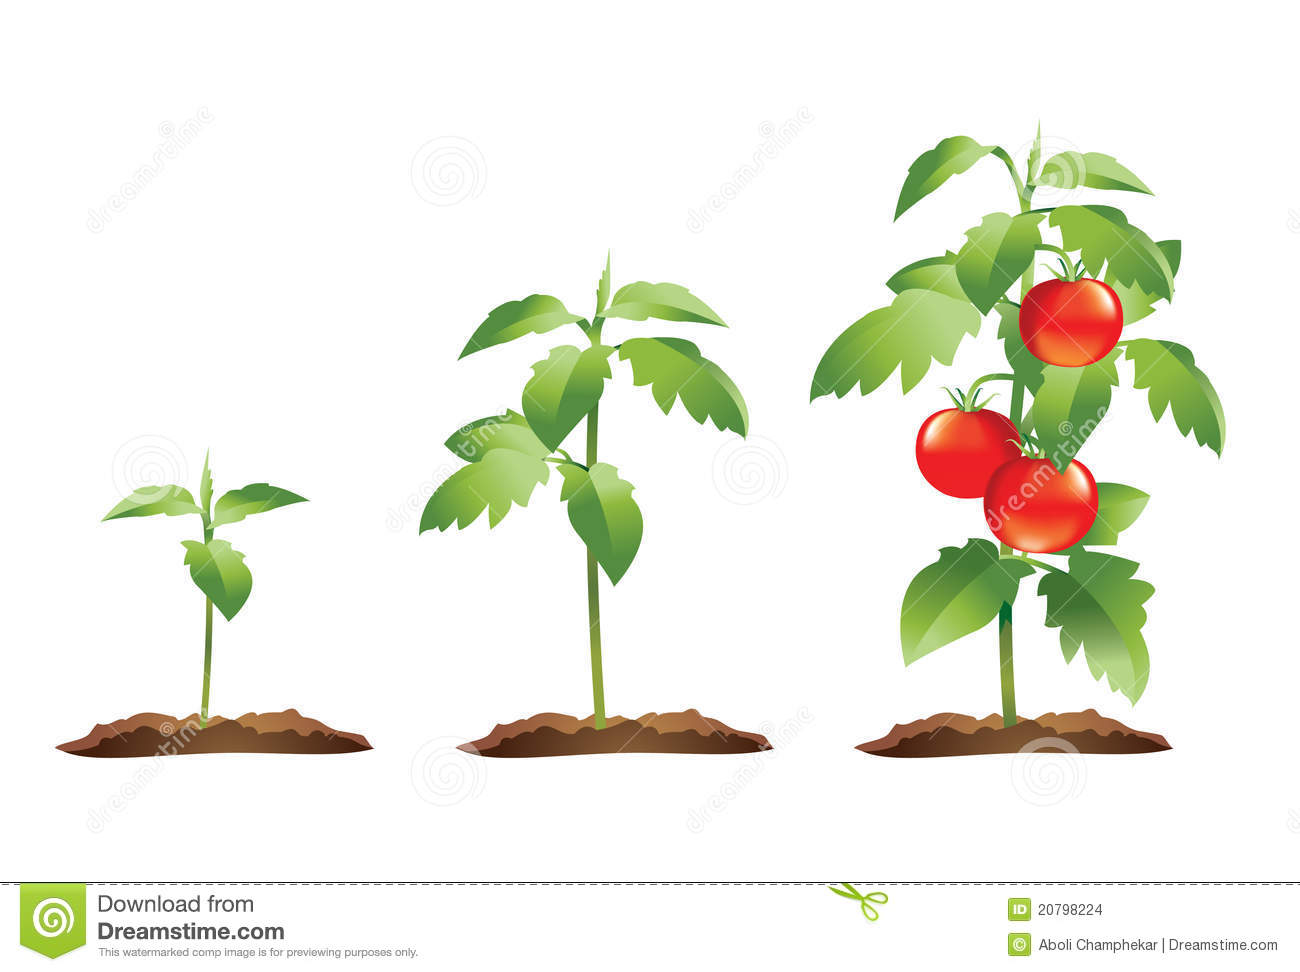 Stages Of Growth Of A Small Tomato Plant To A Fully Grown Plant